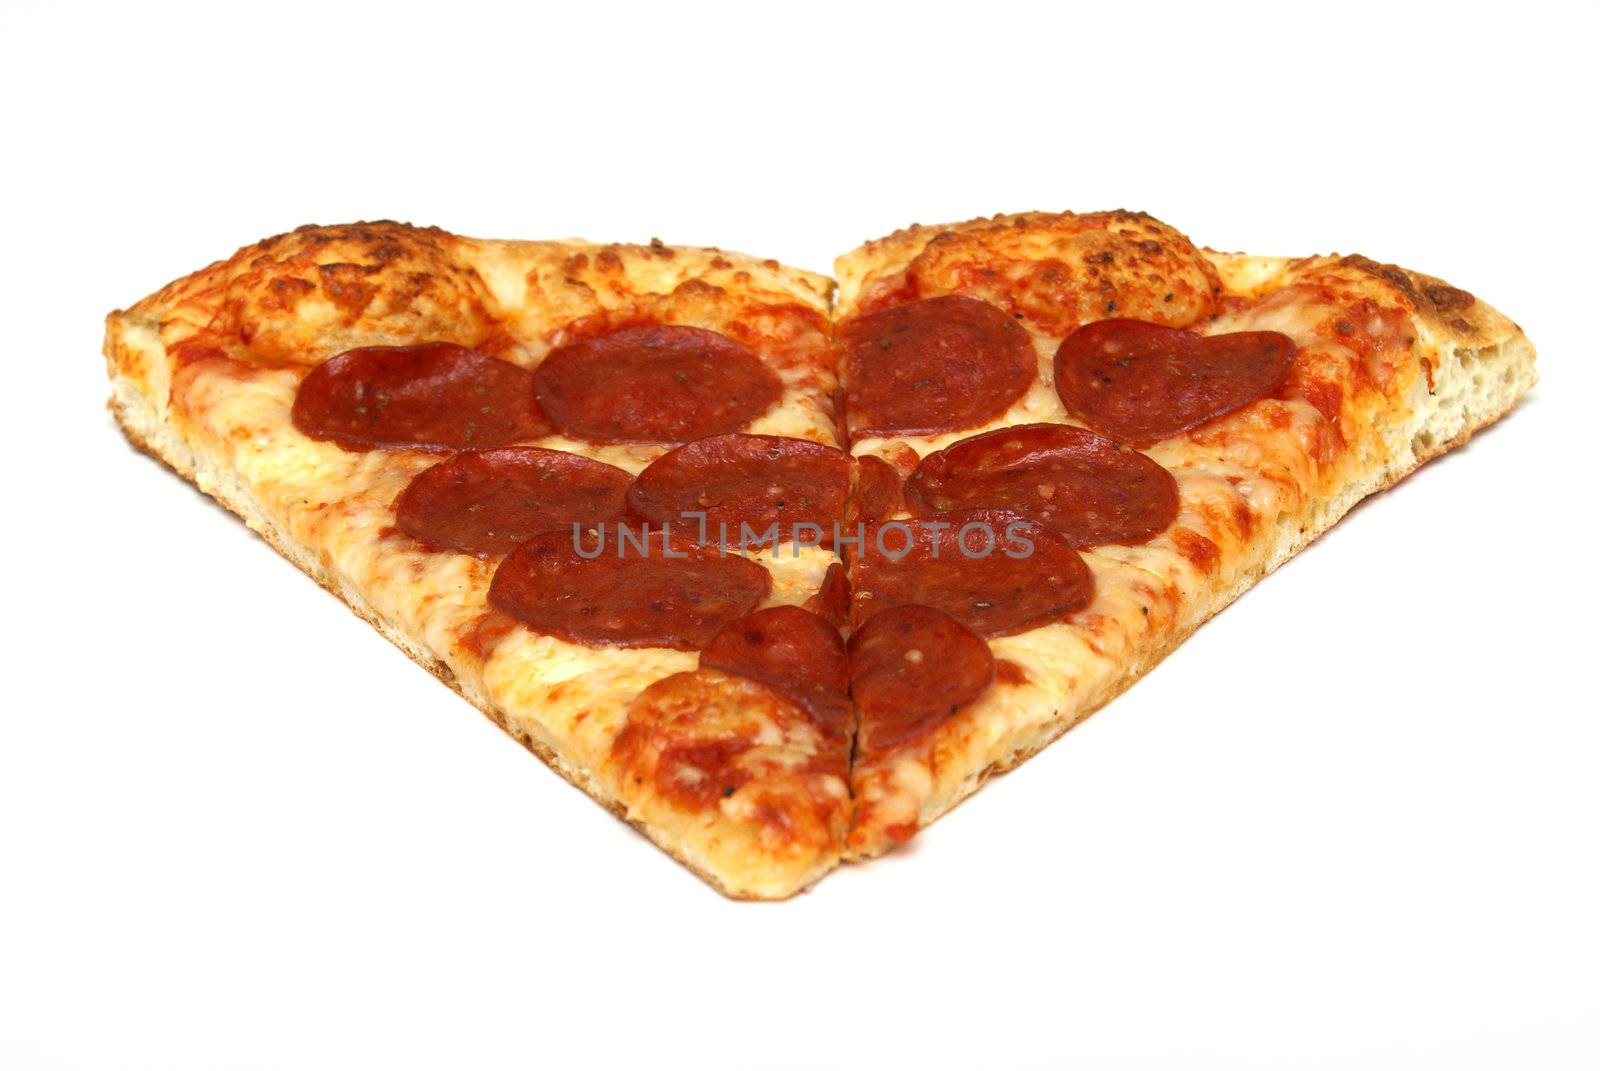 A slice of pepperoni pizza over white background.